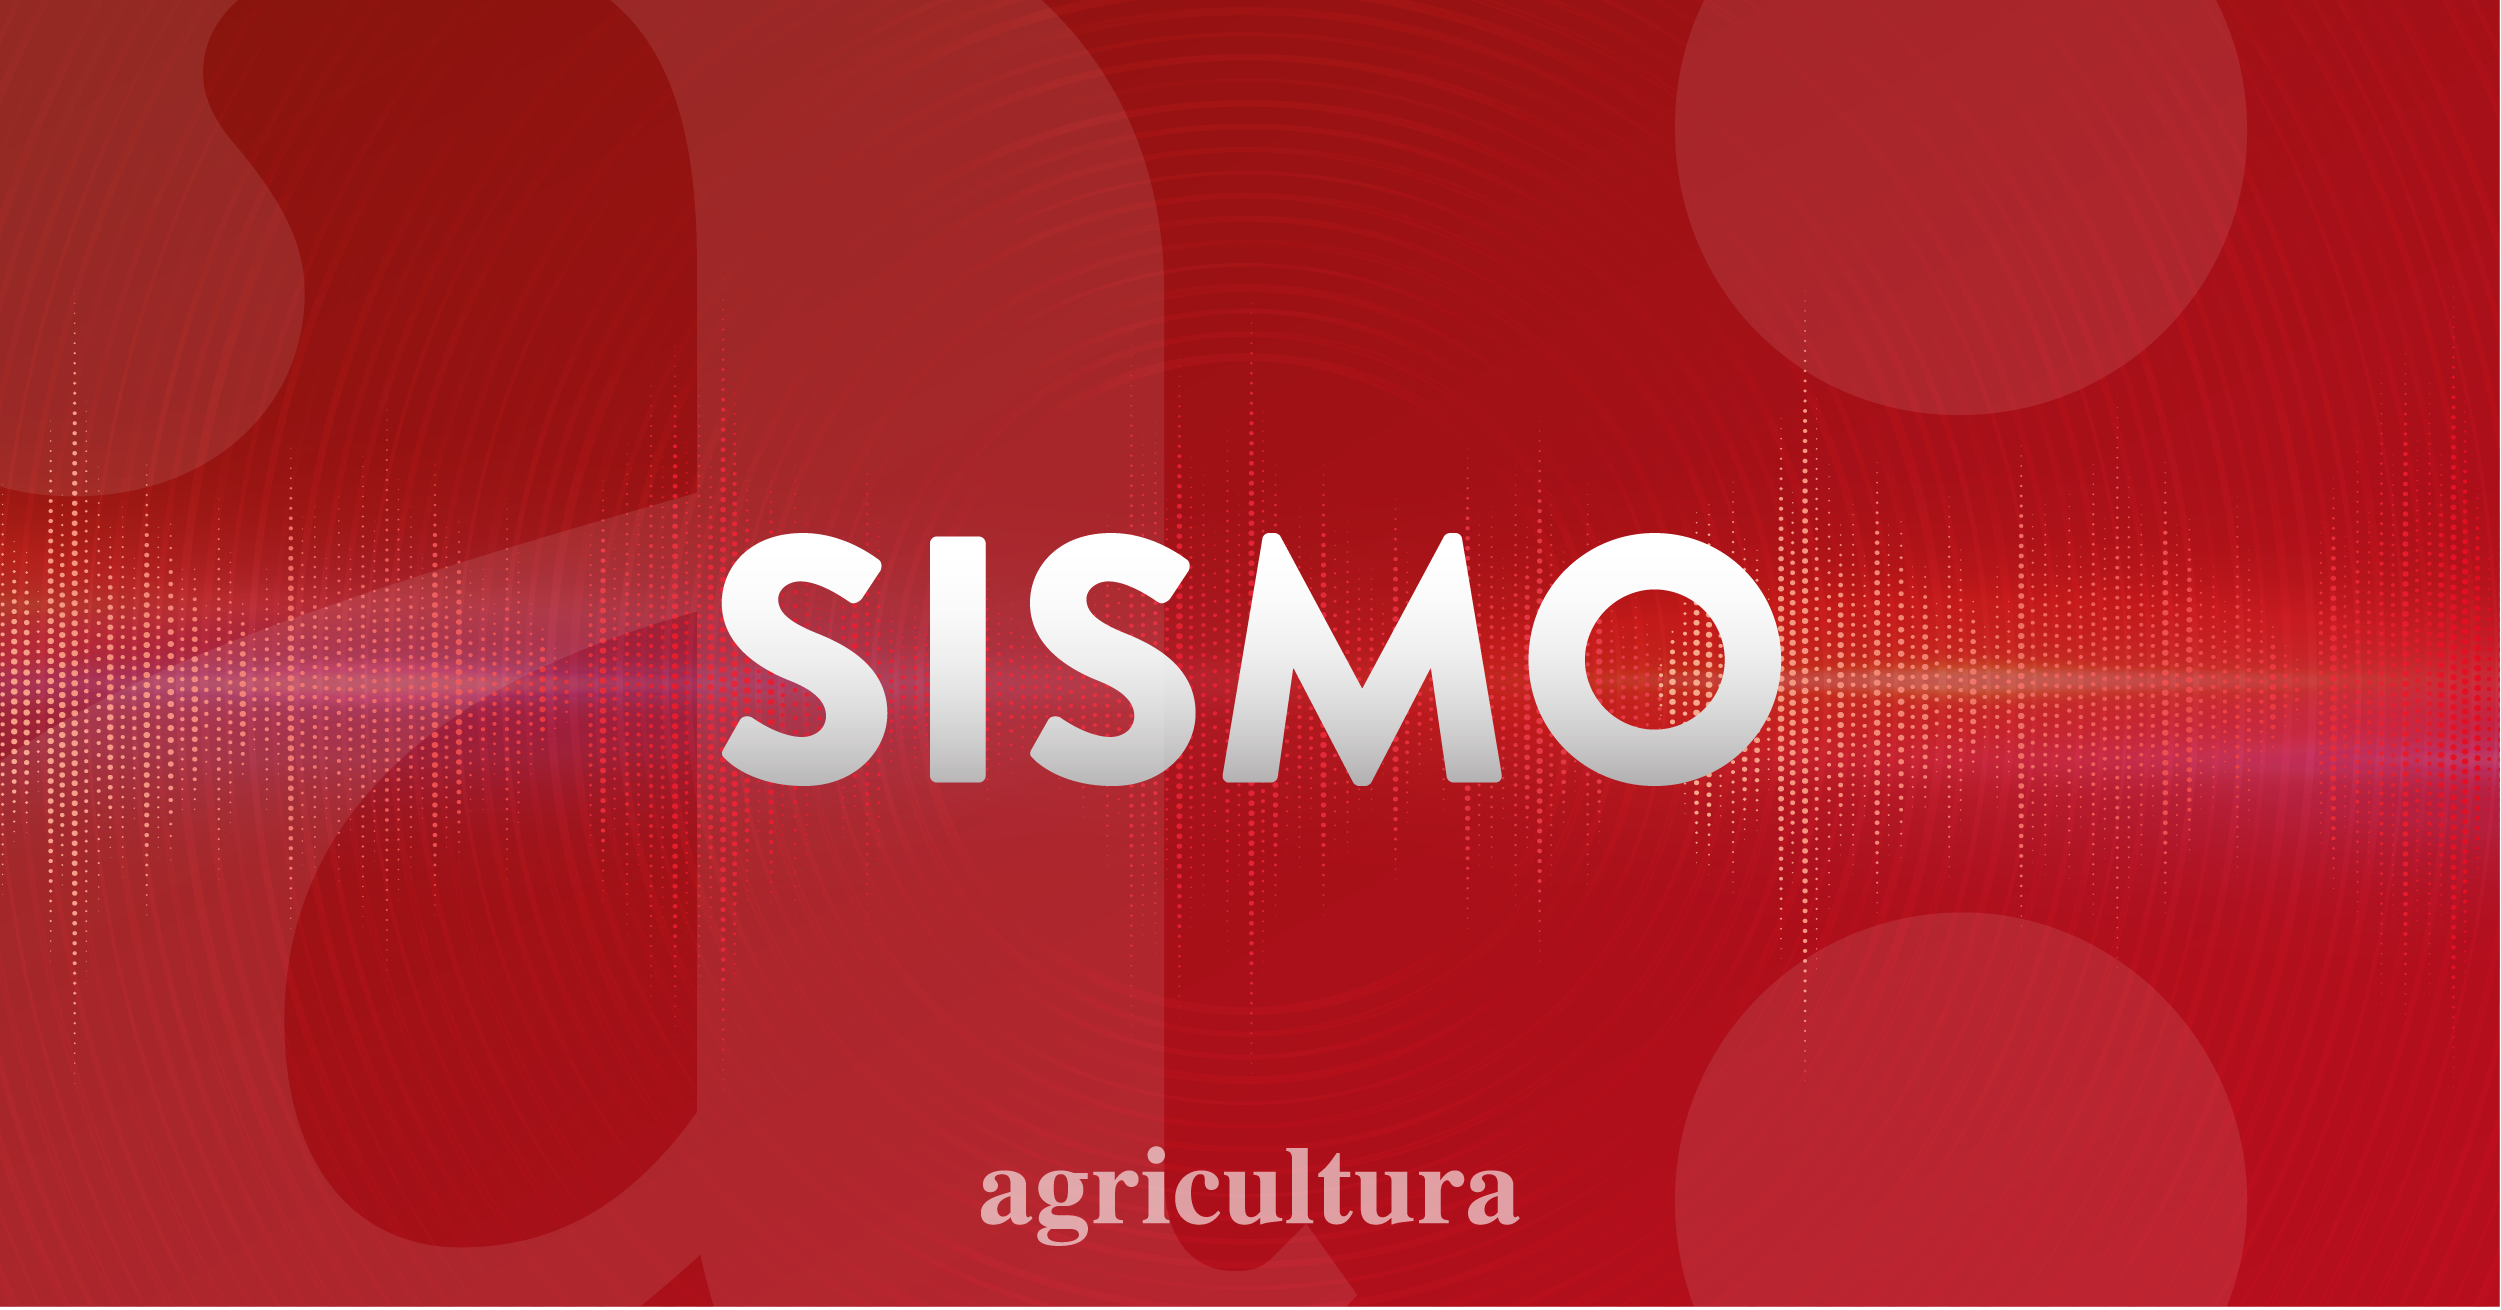 Agricultura - Sismo